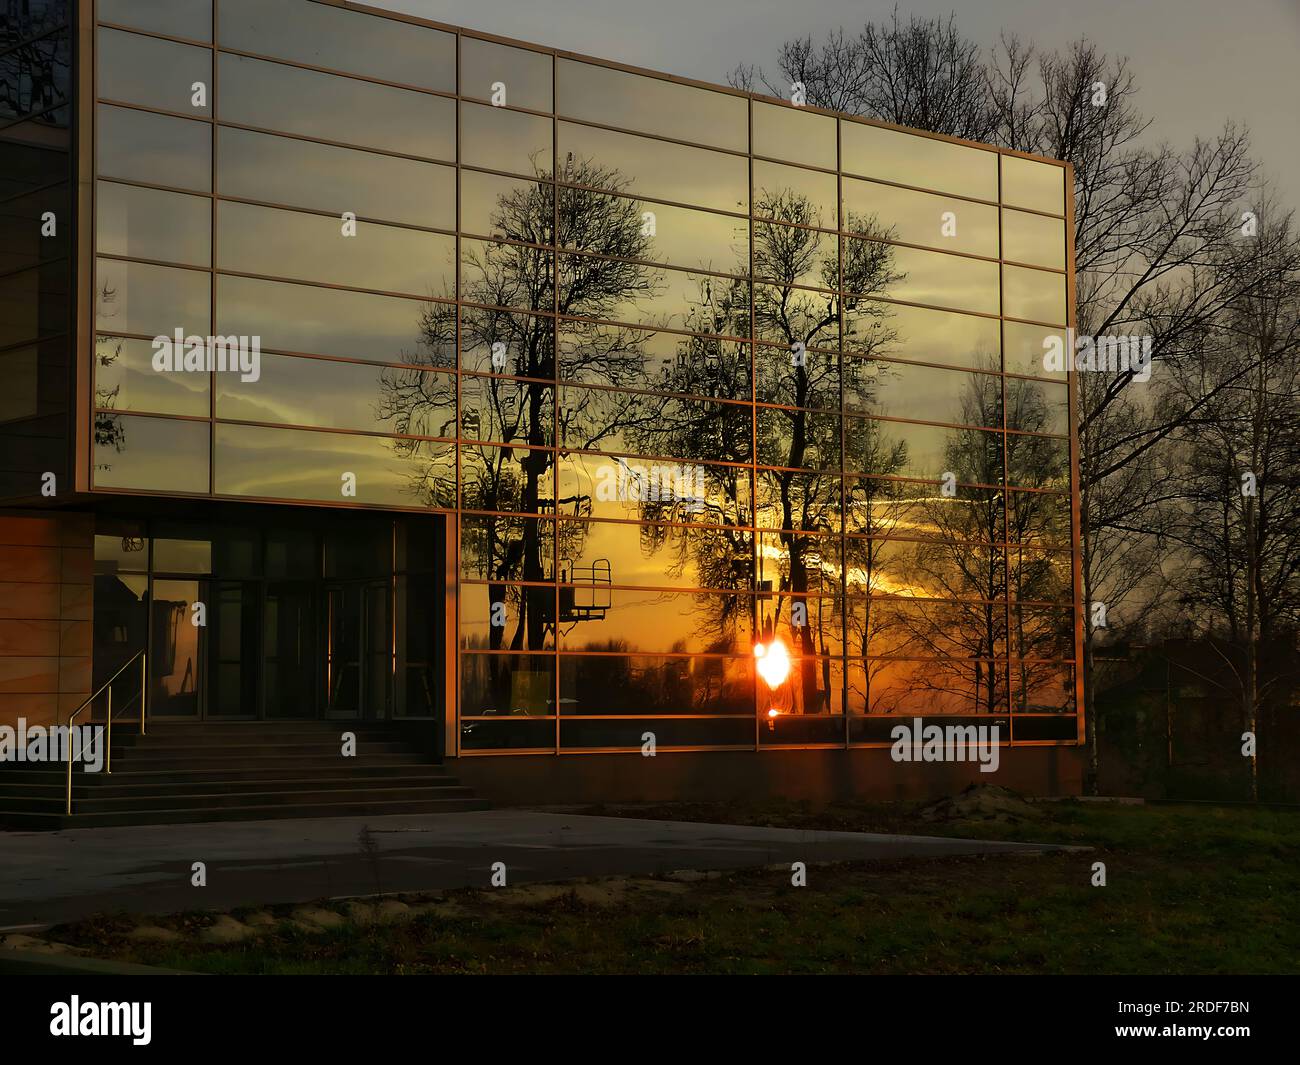 Mirroring the sunset and trees in the windows of the building. Stock Photo